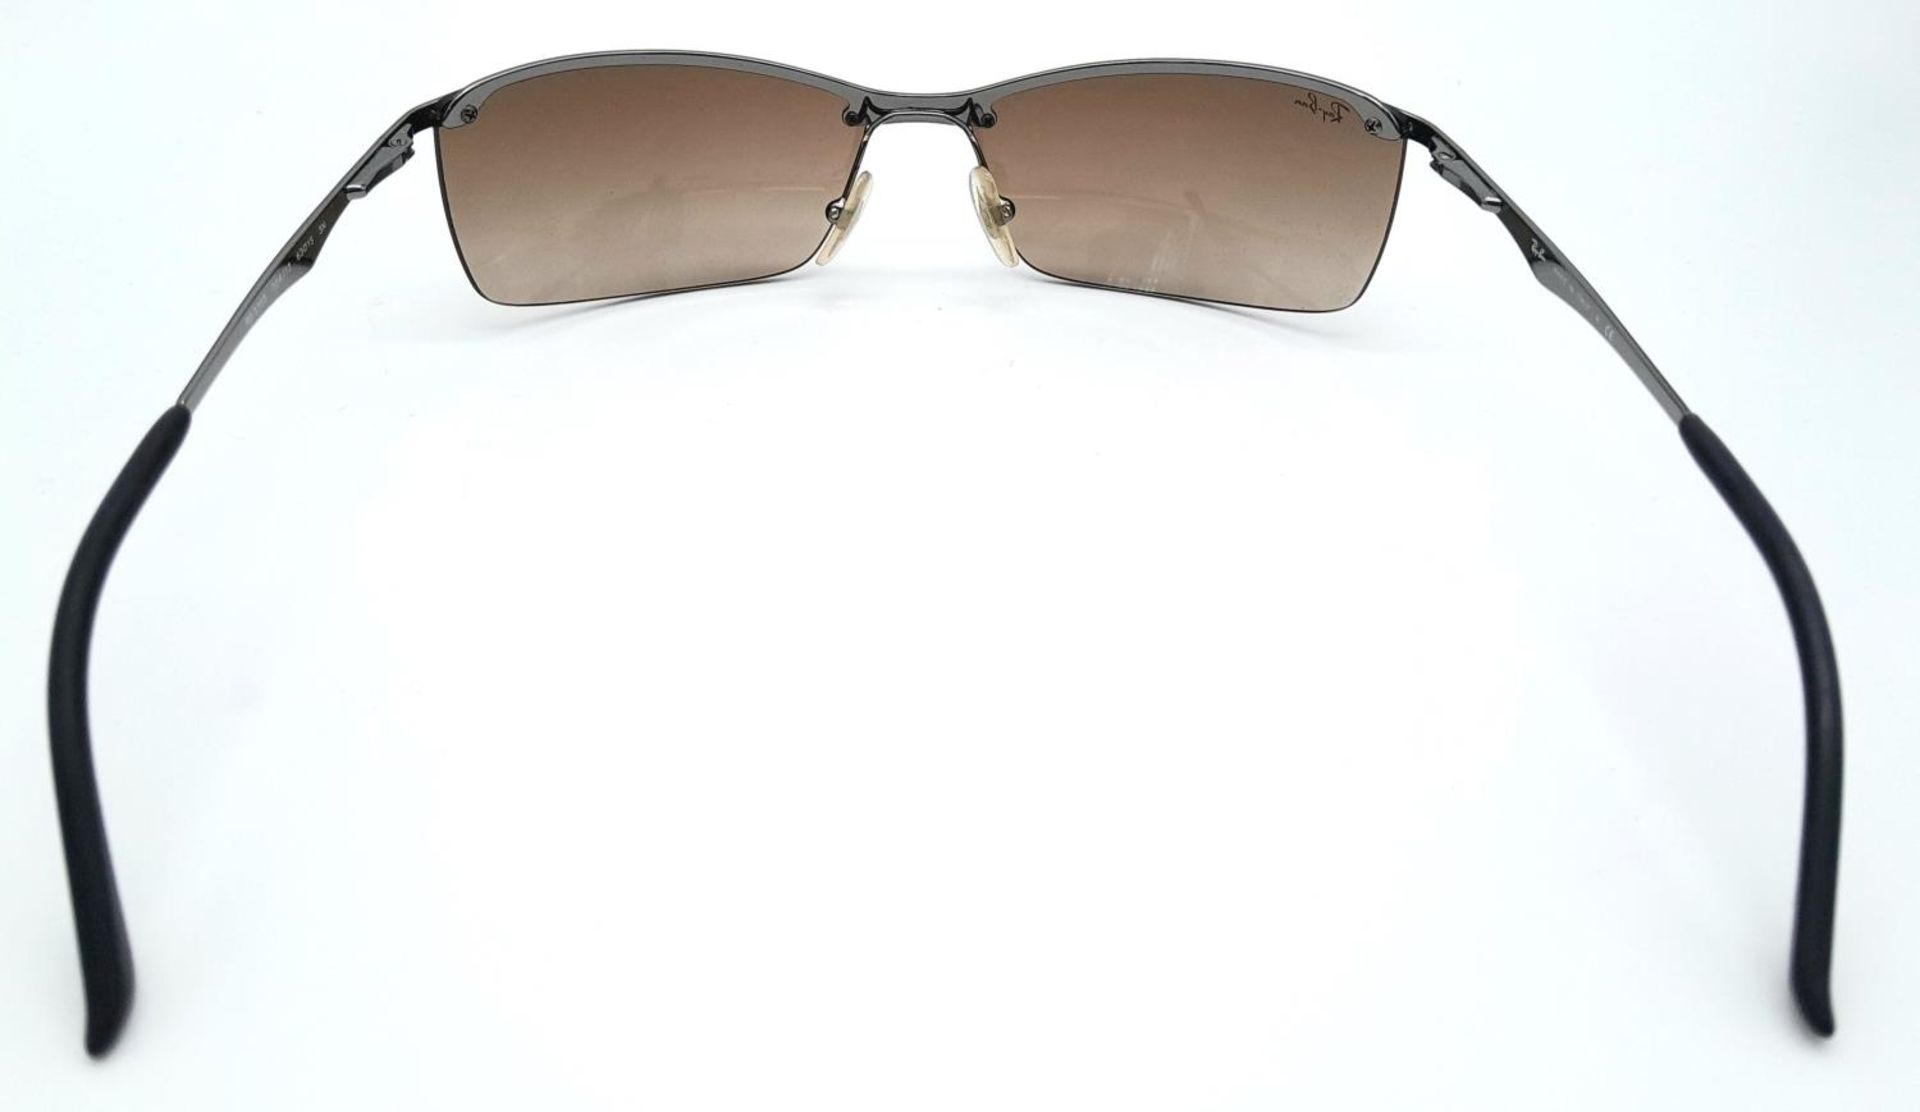 A Pair of Ray Ban Sunglasses - With case that needs restitching. - Image 6 of 8